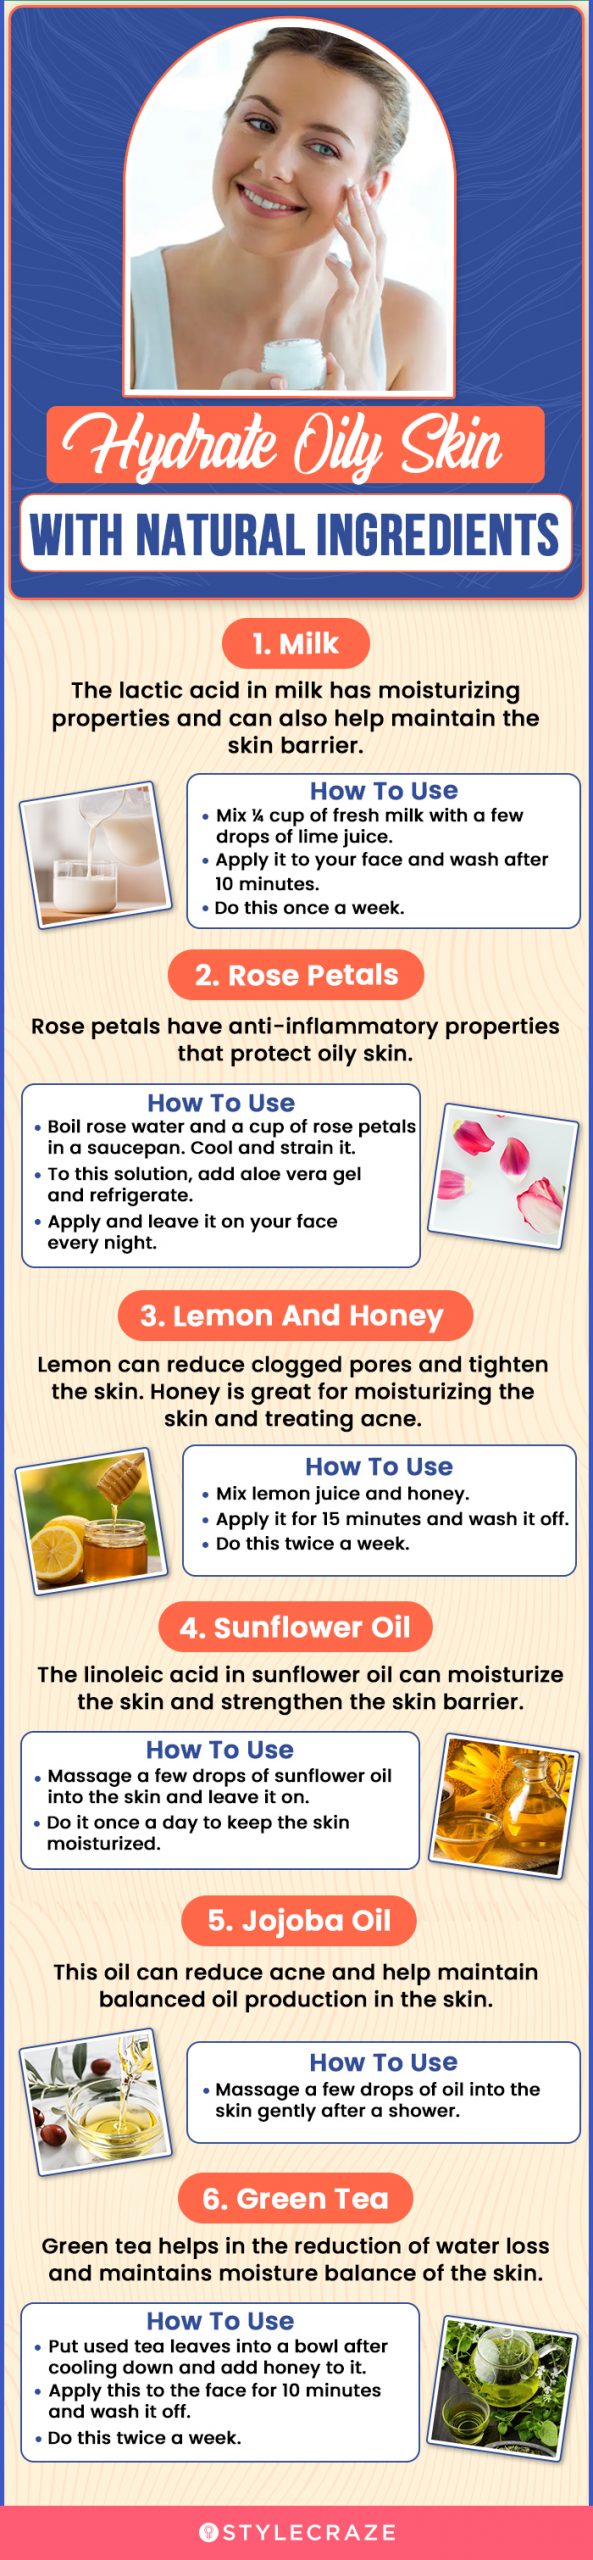 hydrate oily skin with natural ingredients(infographic)